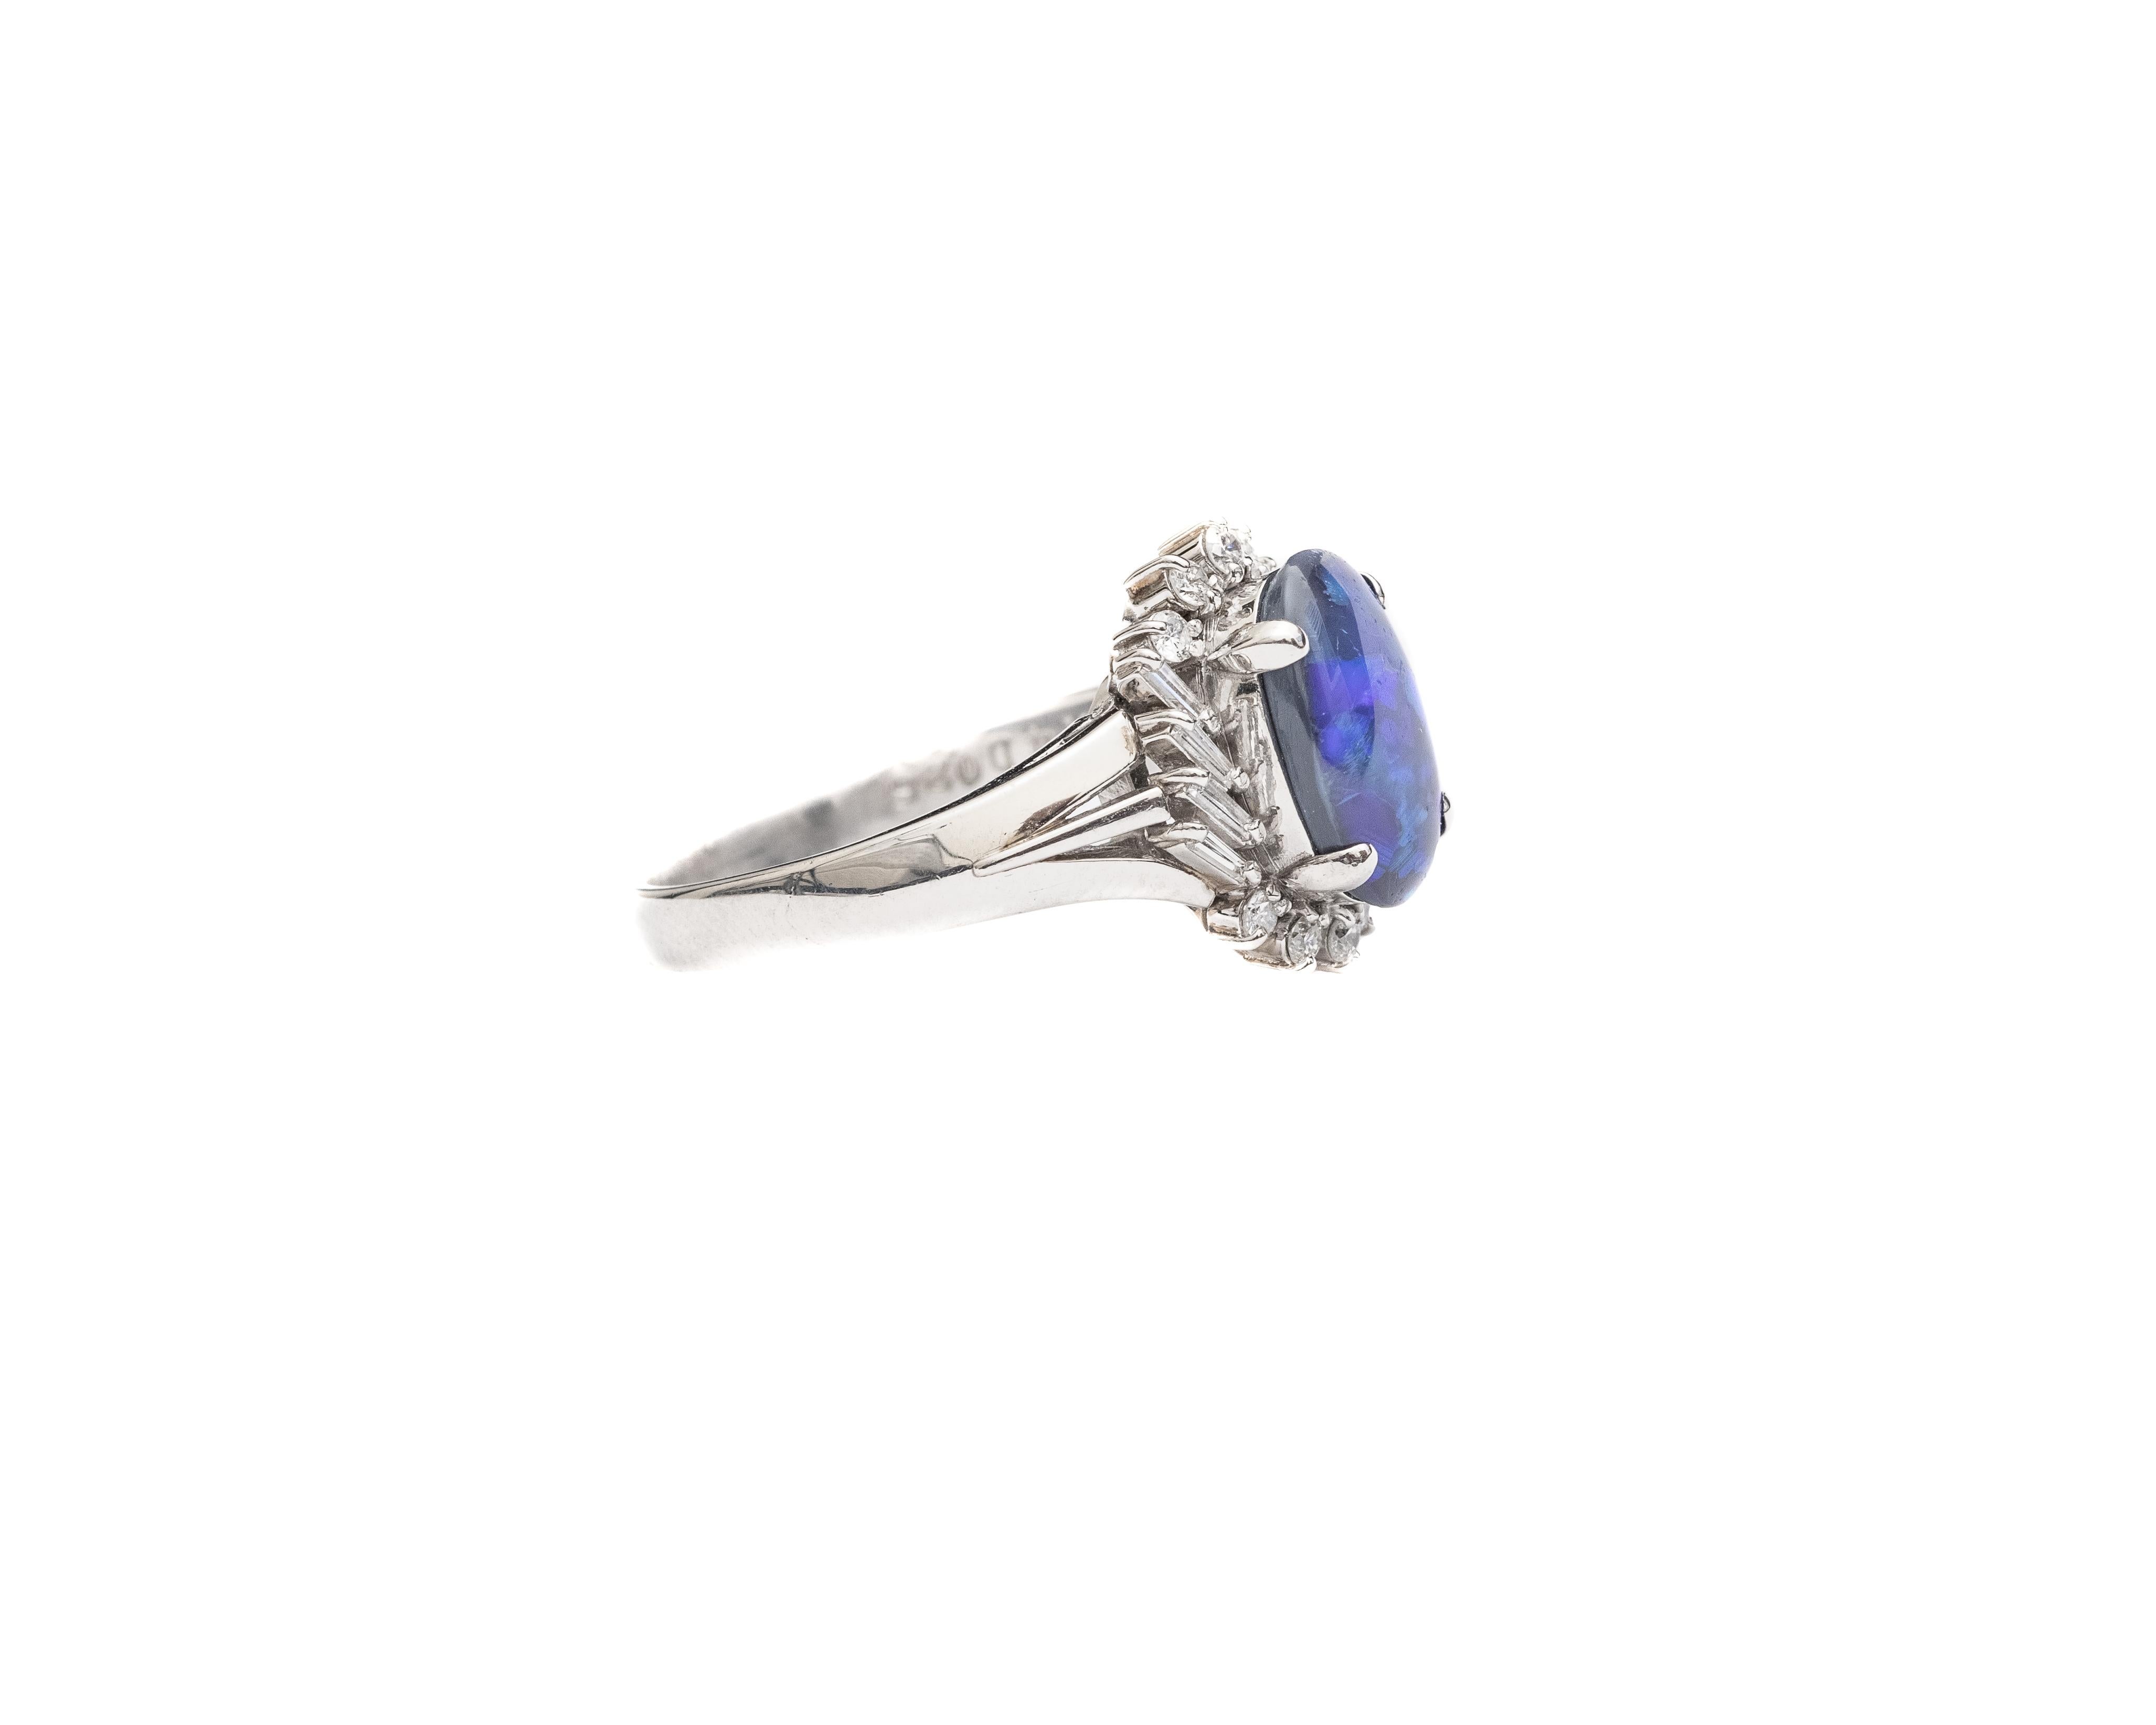 Item Description:
Metal type: Platinum
Weight: 3.6 grams
Size: 5 (resizable)

This beautiful ring features a gorgeous black opal with strong deep blue and green hues visible under different lighting. The opal is 1.14 carat in weight and is 4-prong